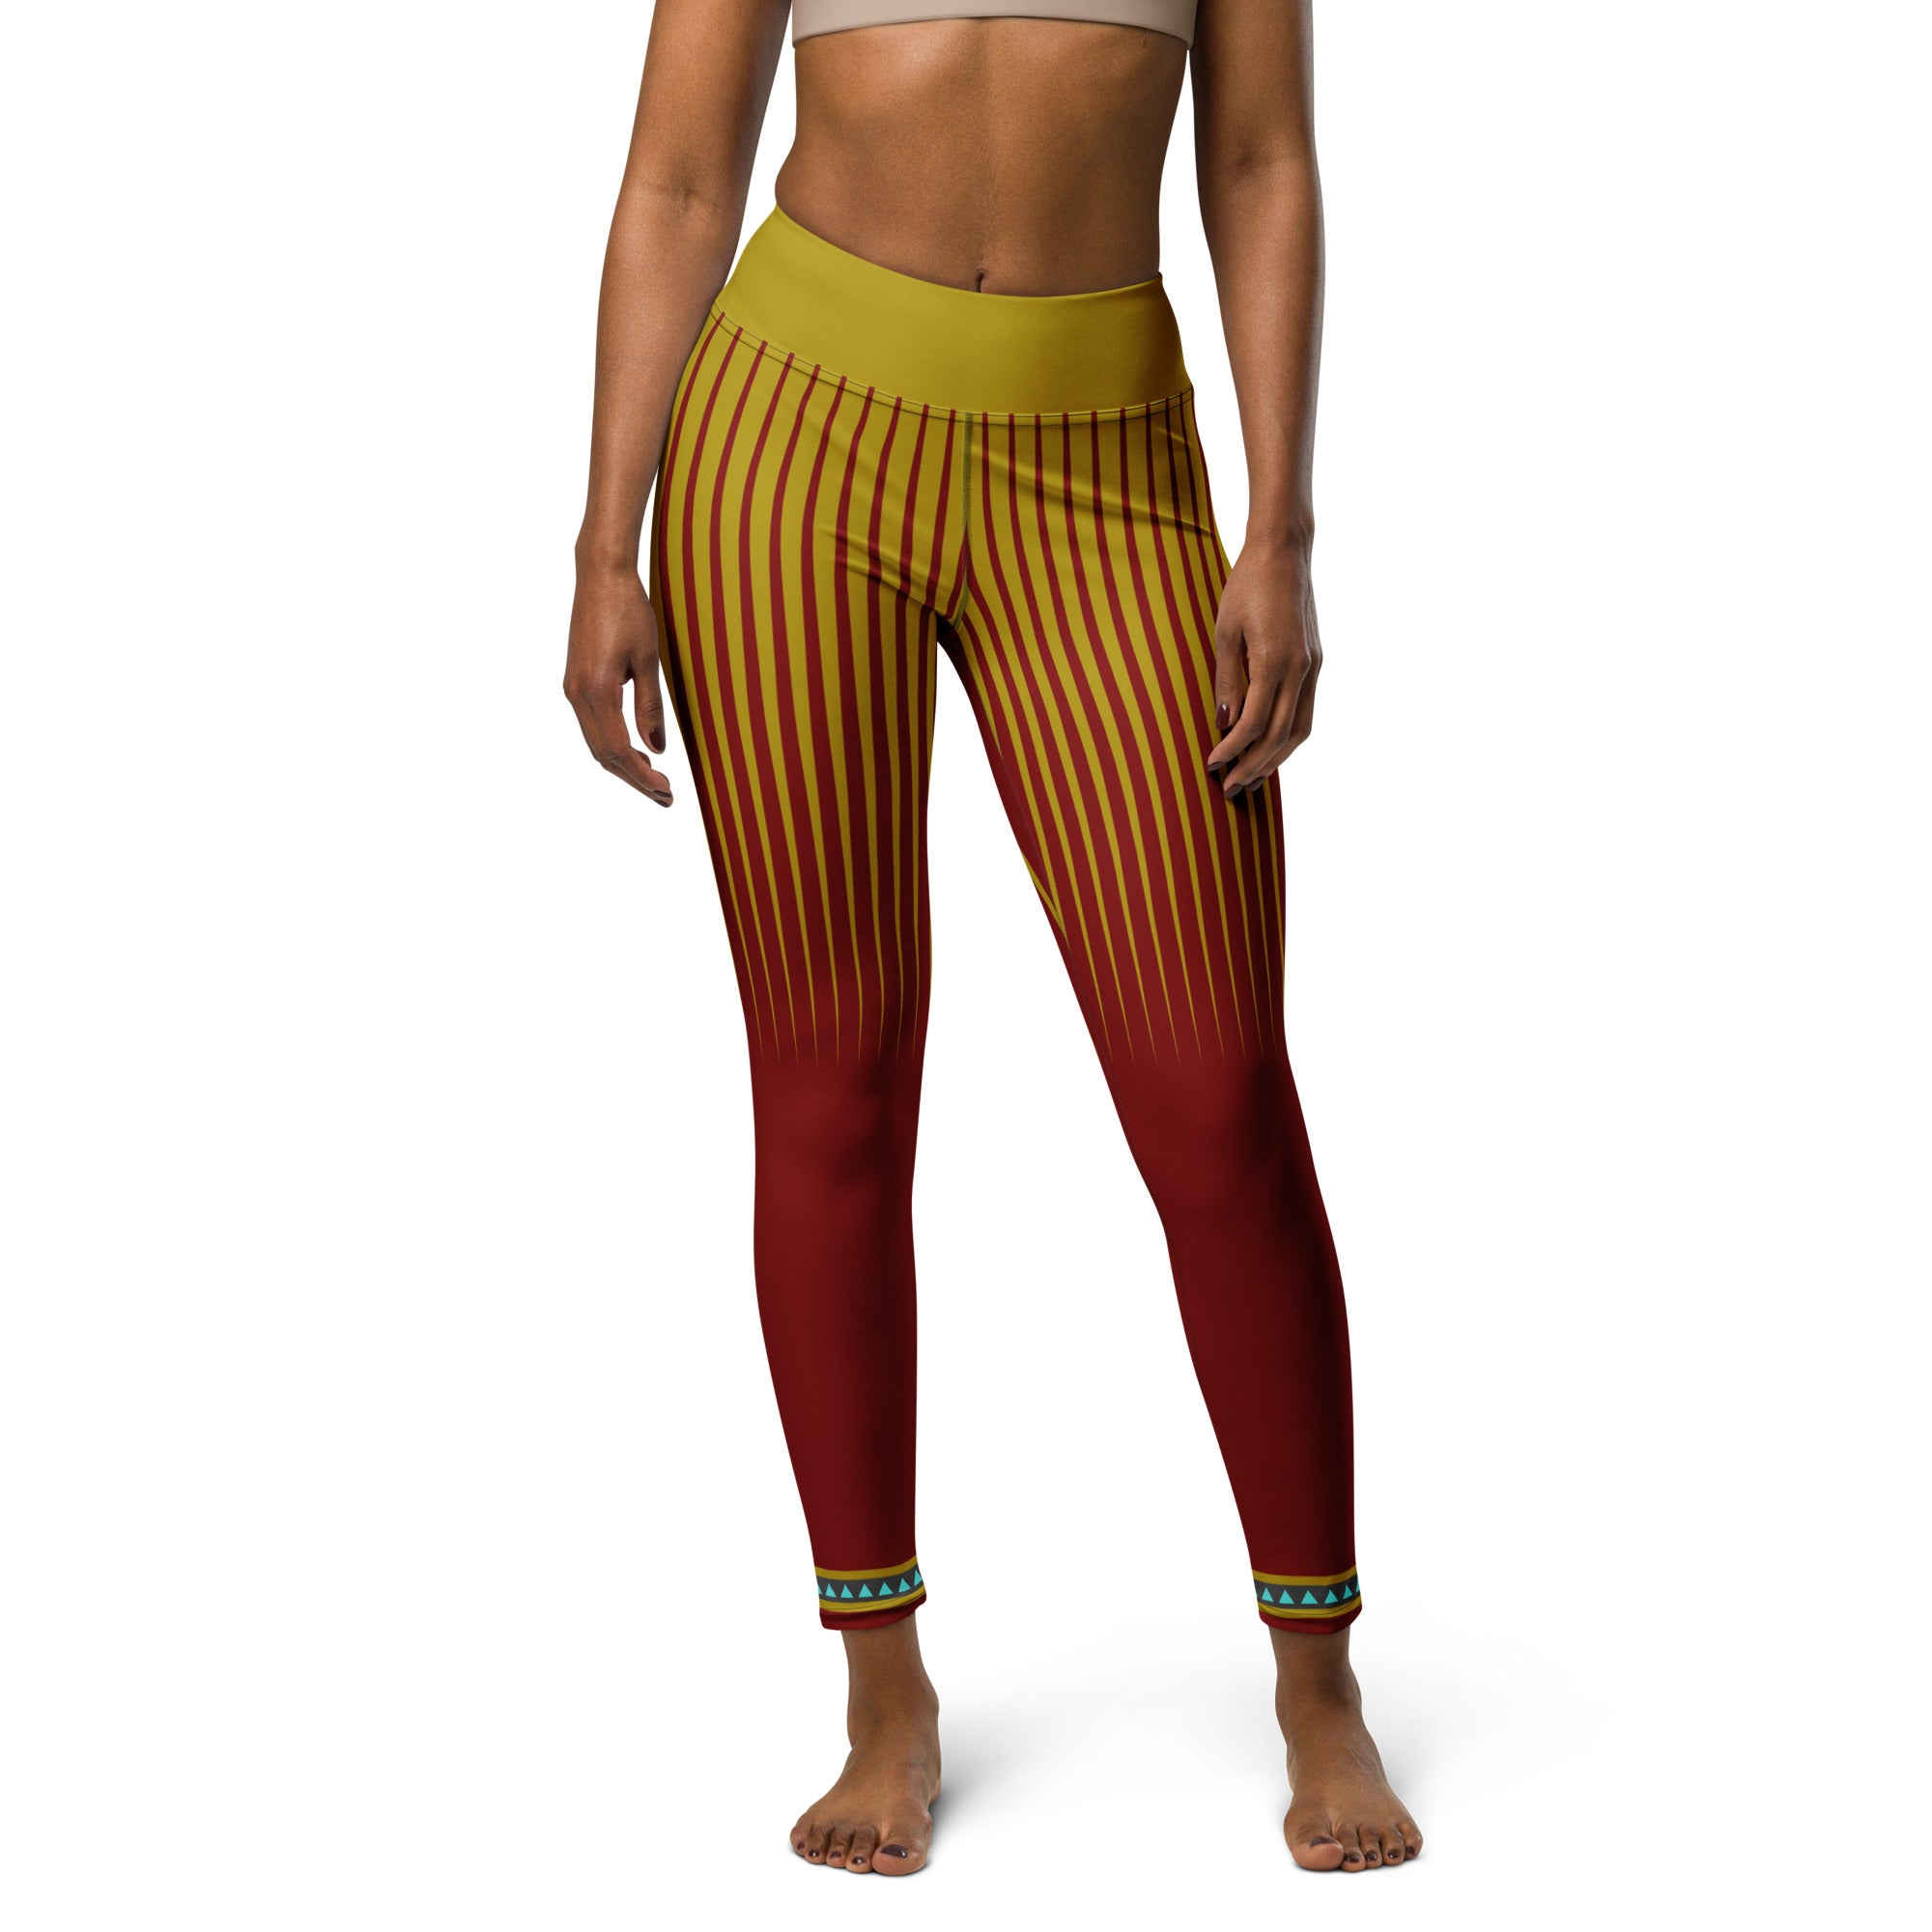 Garnet Glow Yoga Leggings in vibrant red with a comfortable fit.